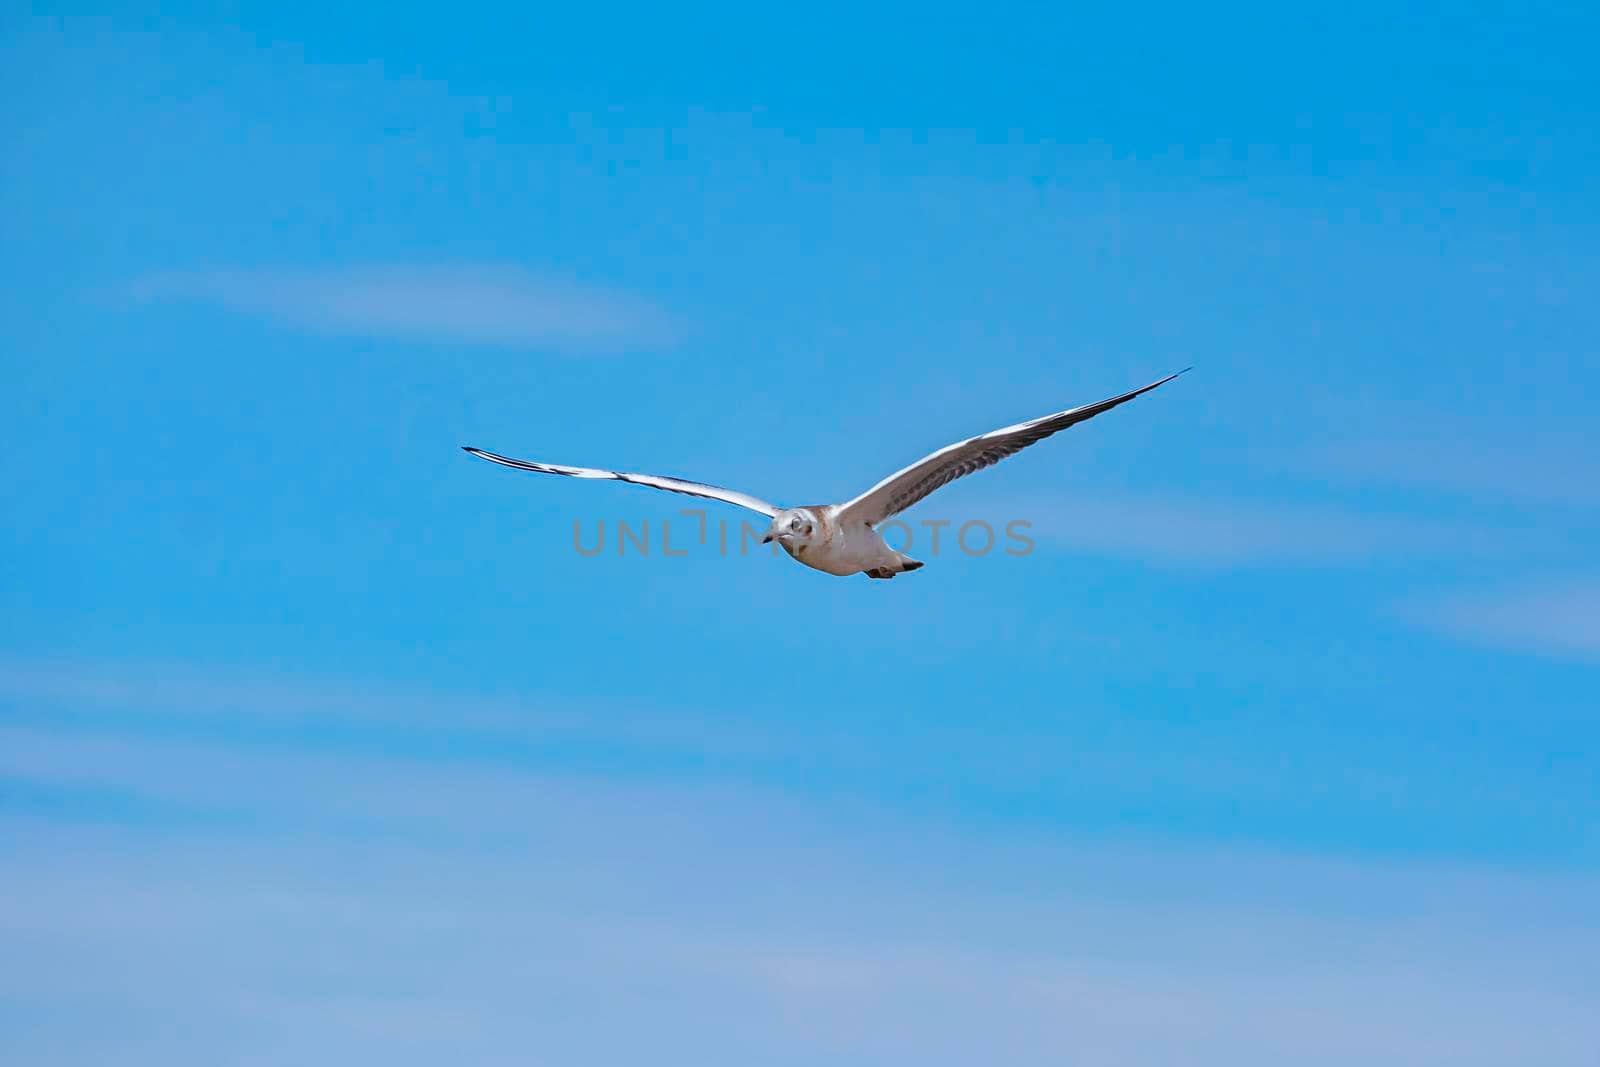 Seagull in the sky by SNR